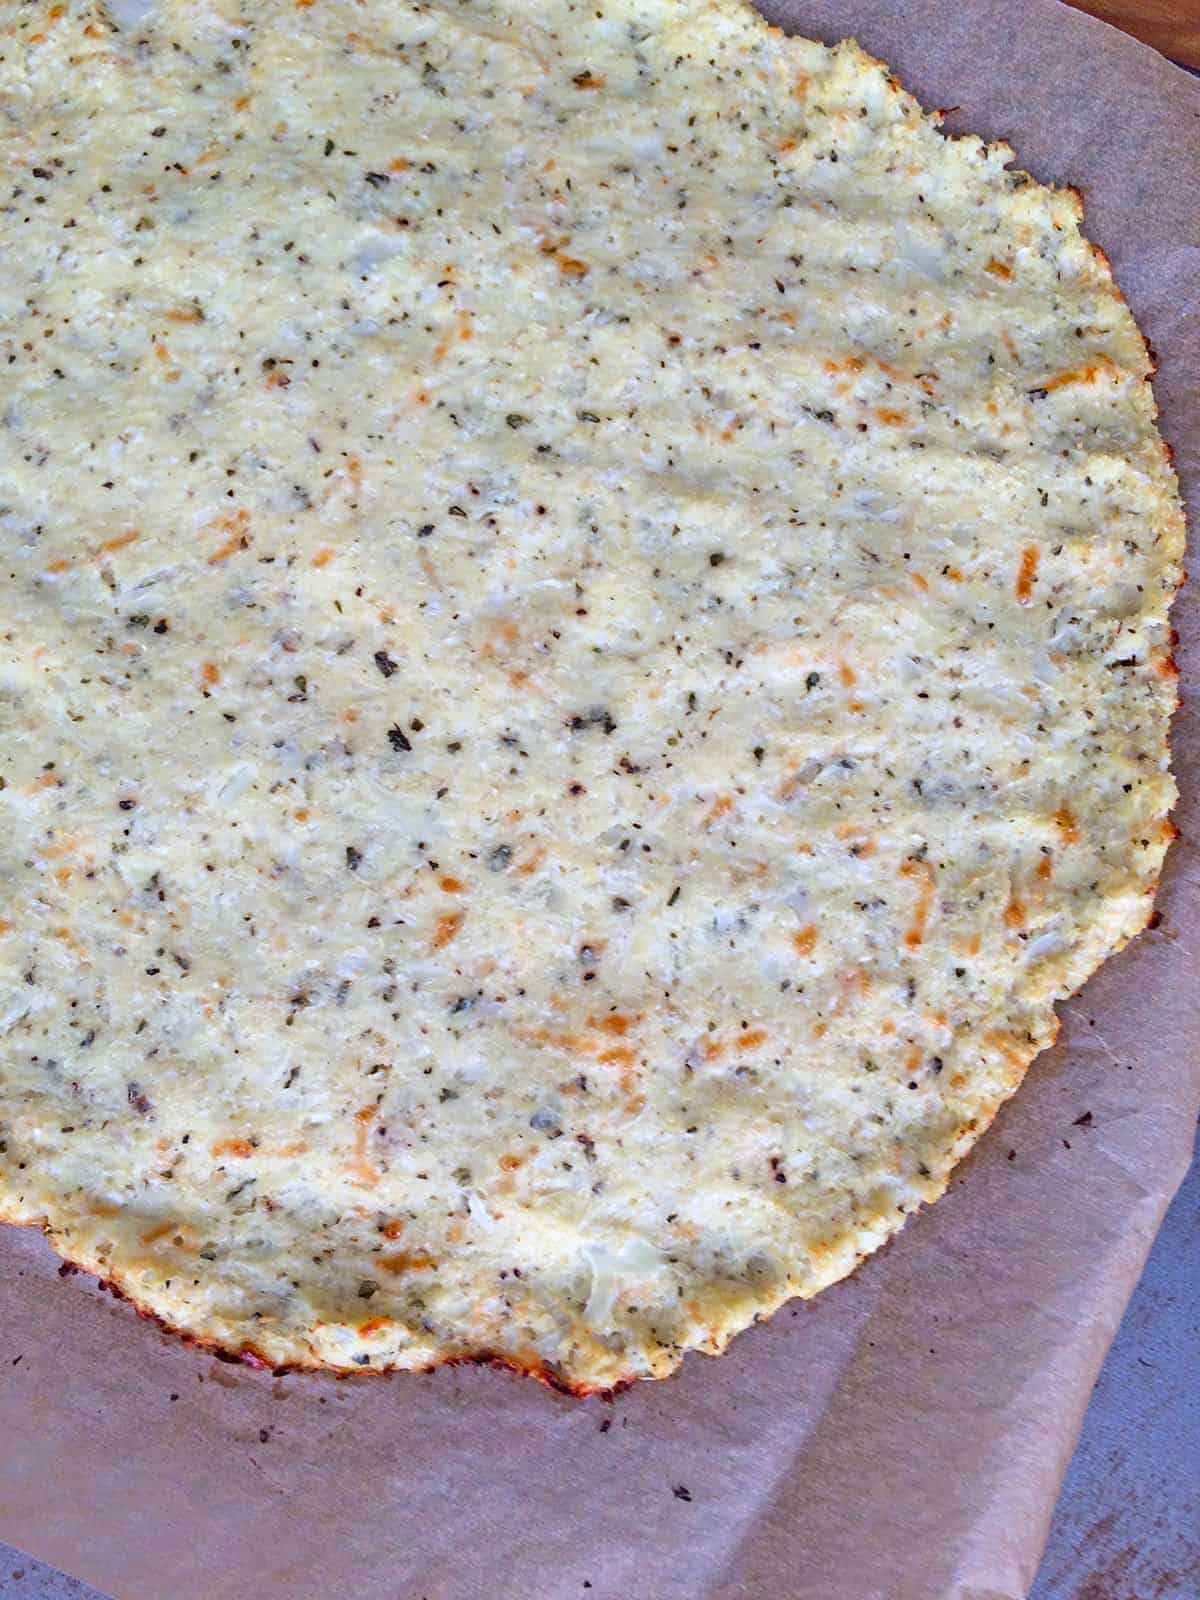 Baked cauliflower crust on parchment paper